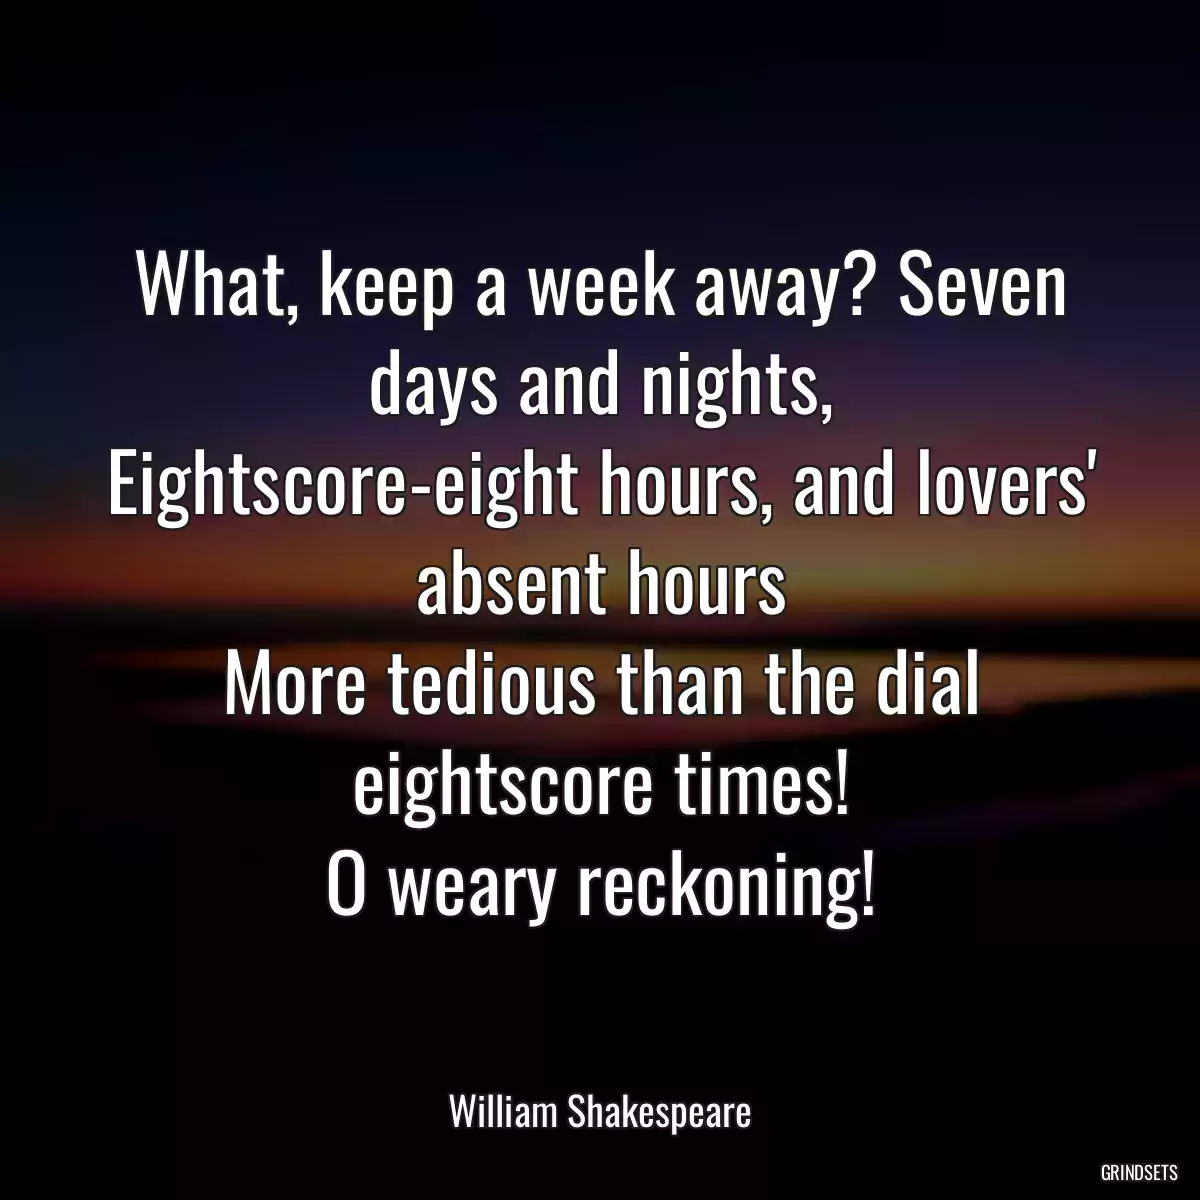 What, keep a week away? Seven days and nights,
Eightscore-eight hours, and lovers\' absent hours
More tedious than the dial eightscore times!
O weary reckoning!